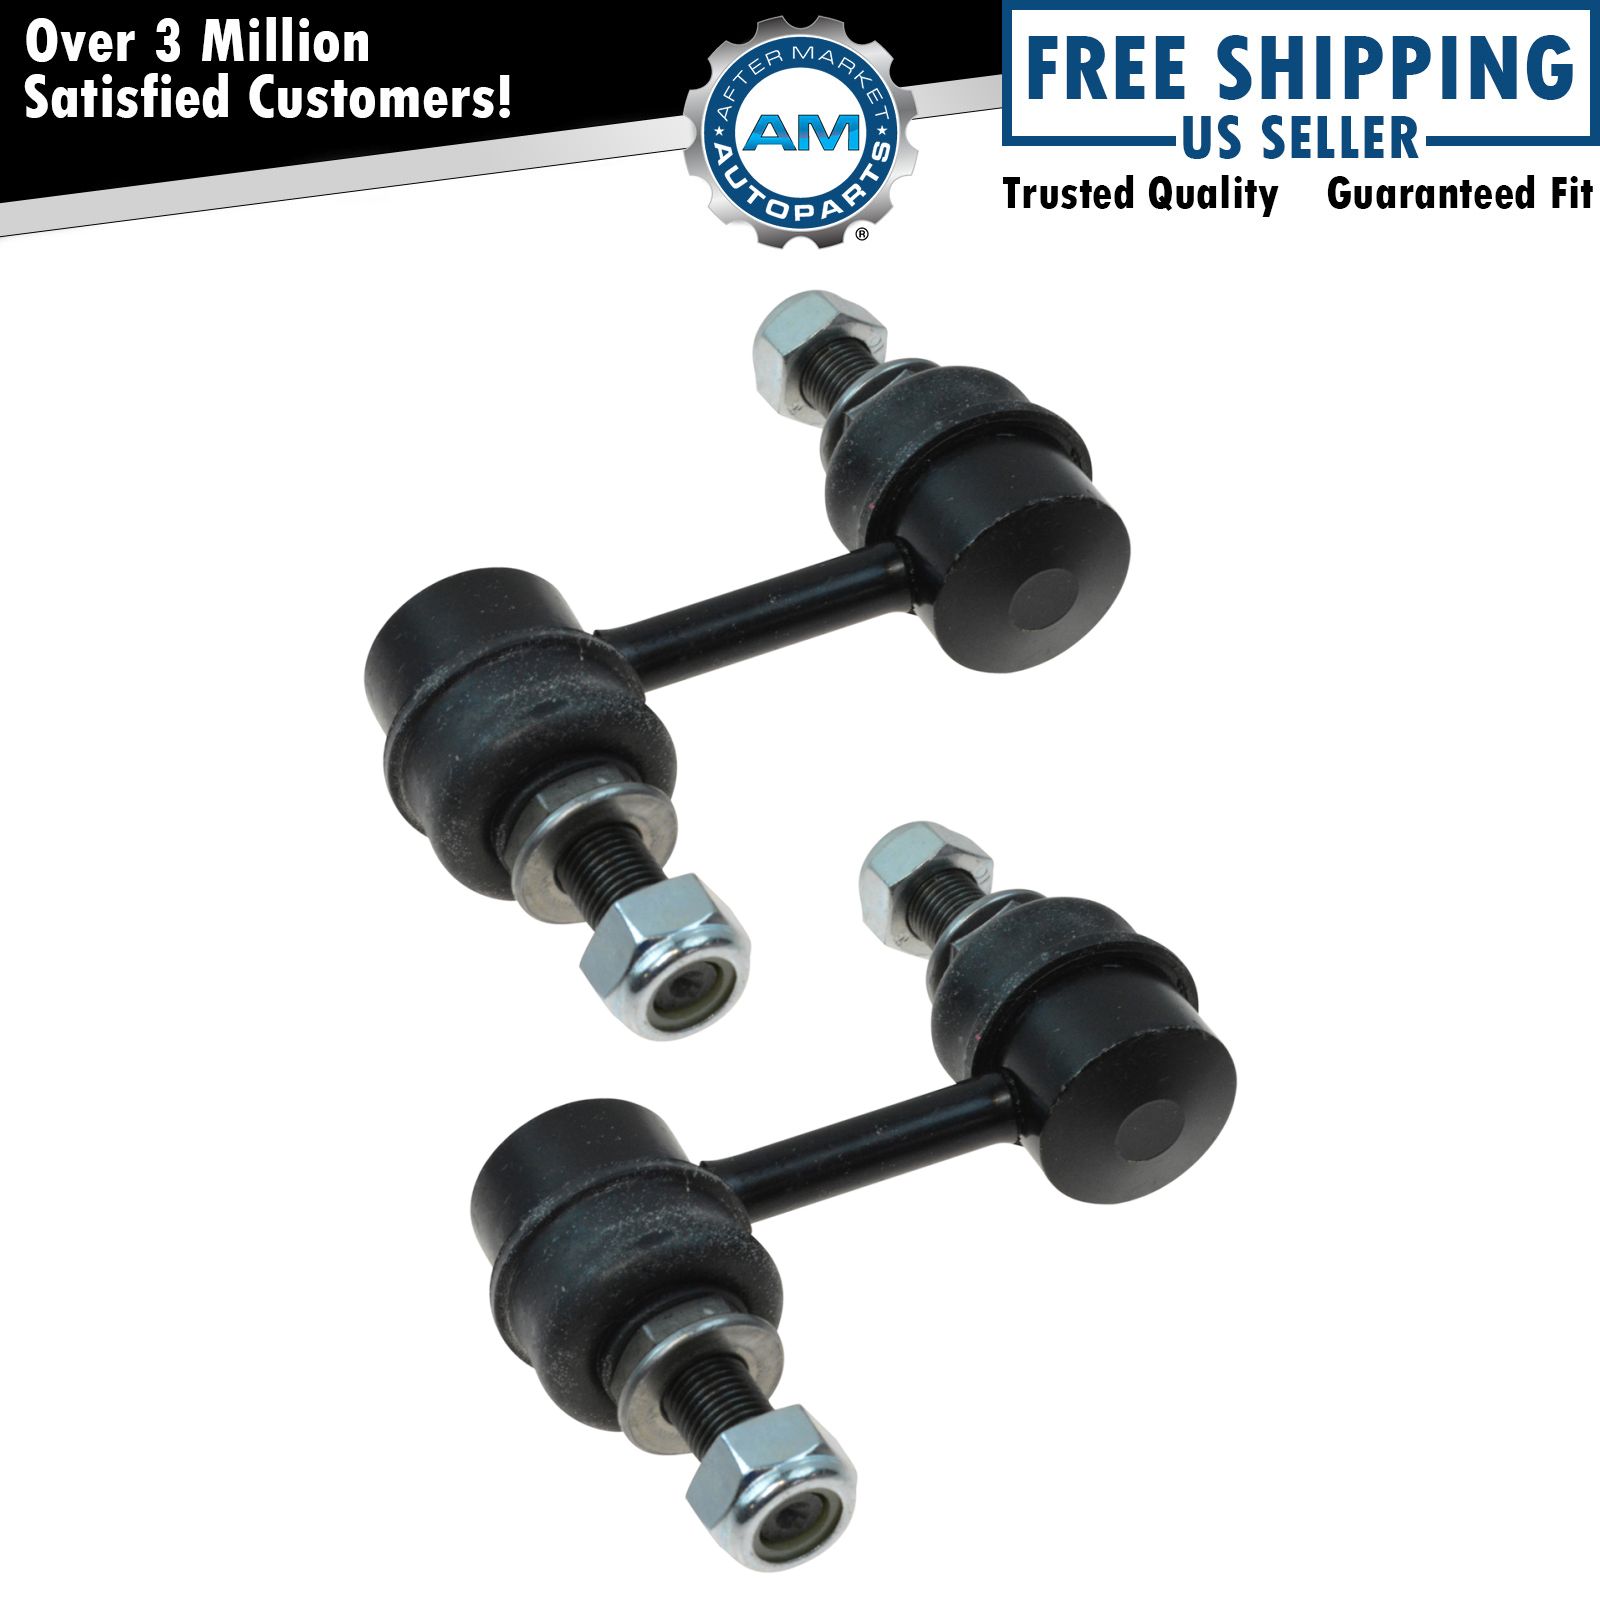 Stabilizer Sway Bar End Link Pair LH & RH Front for Nissan Titan Armada QX56 New